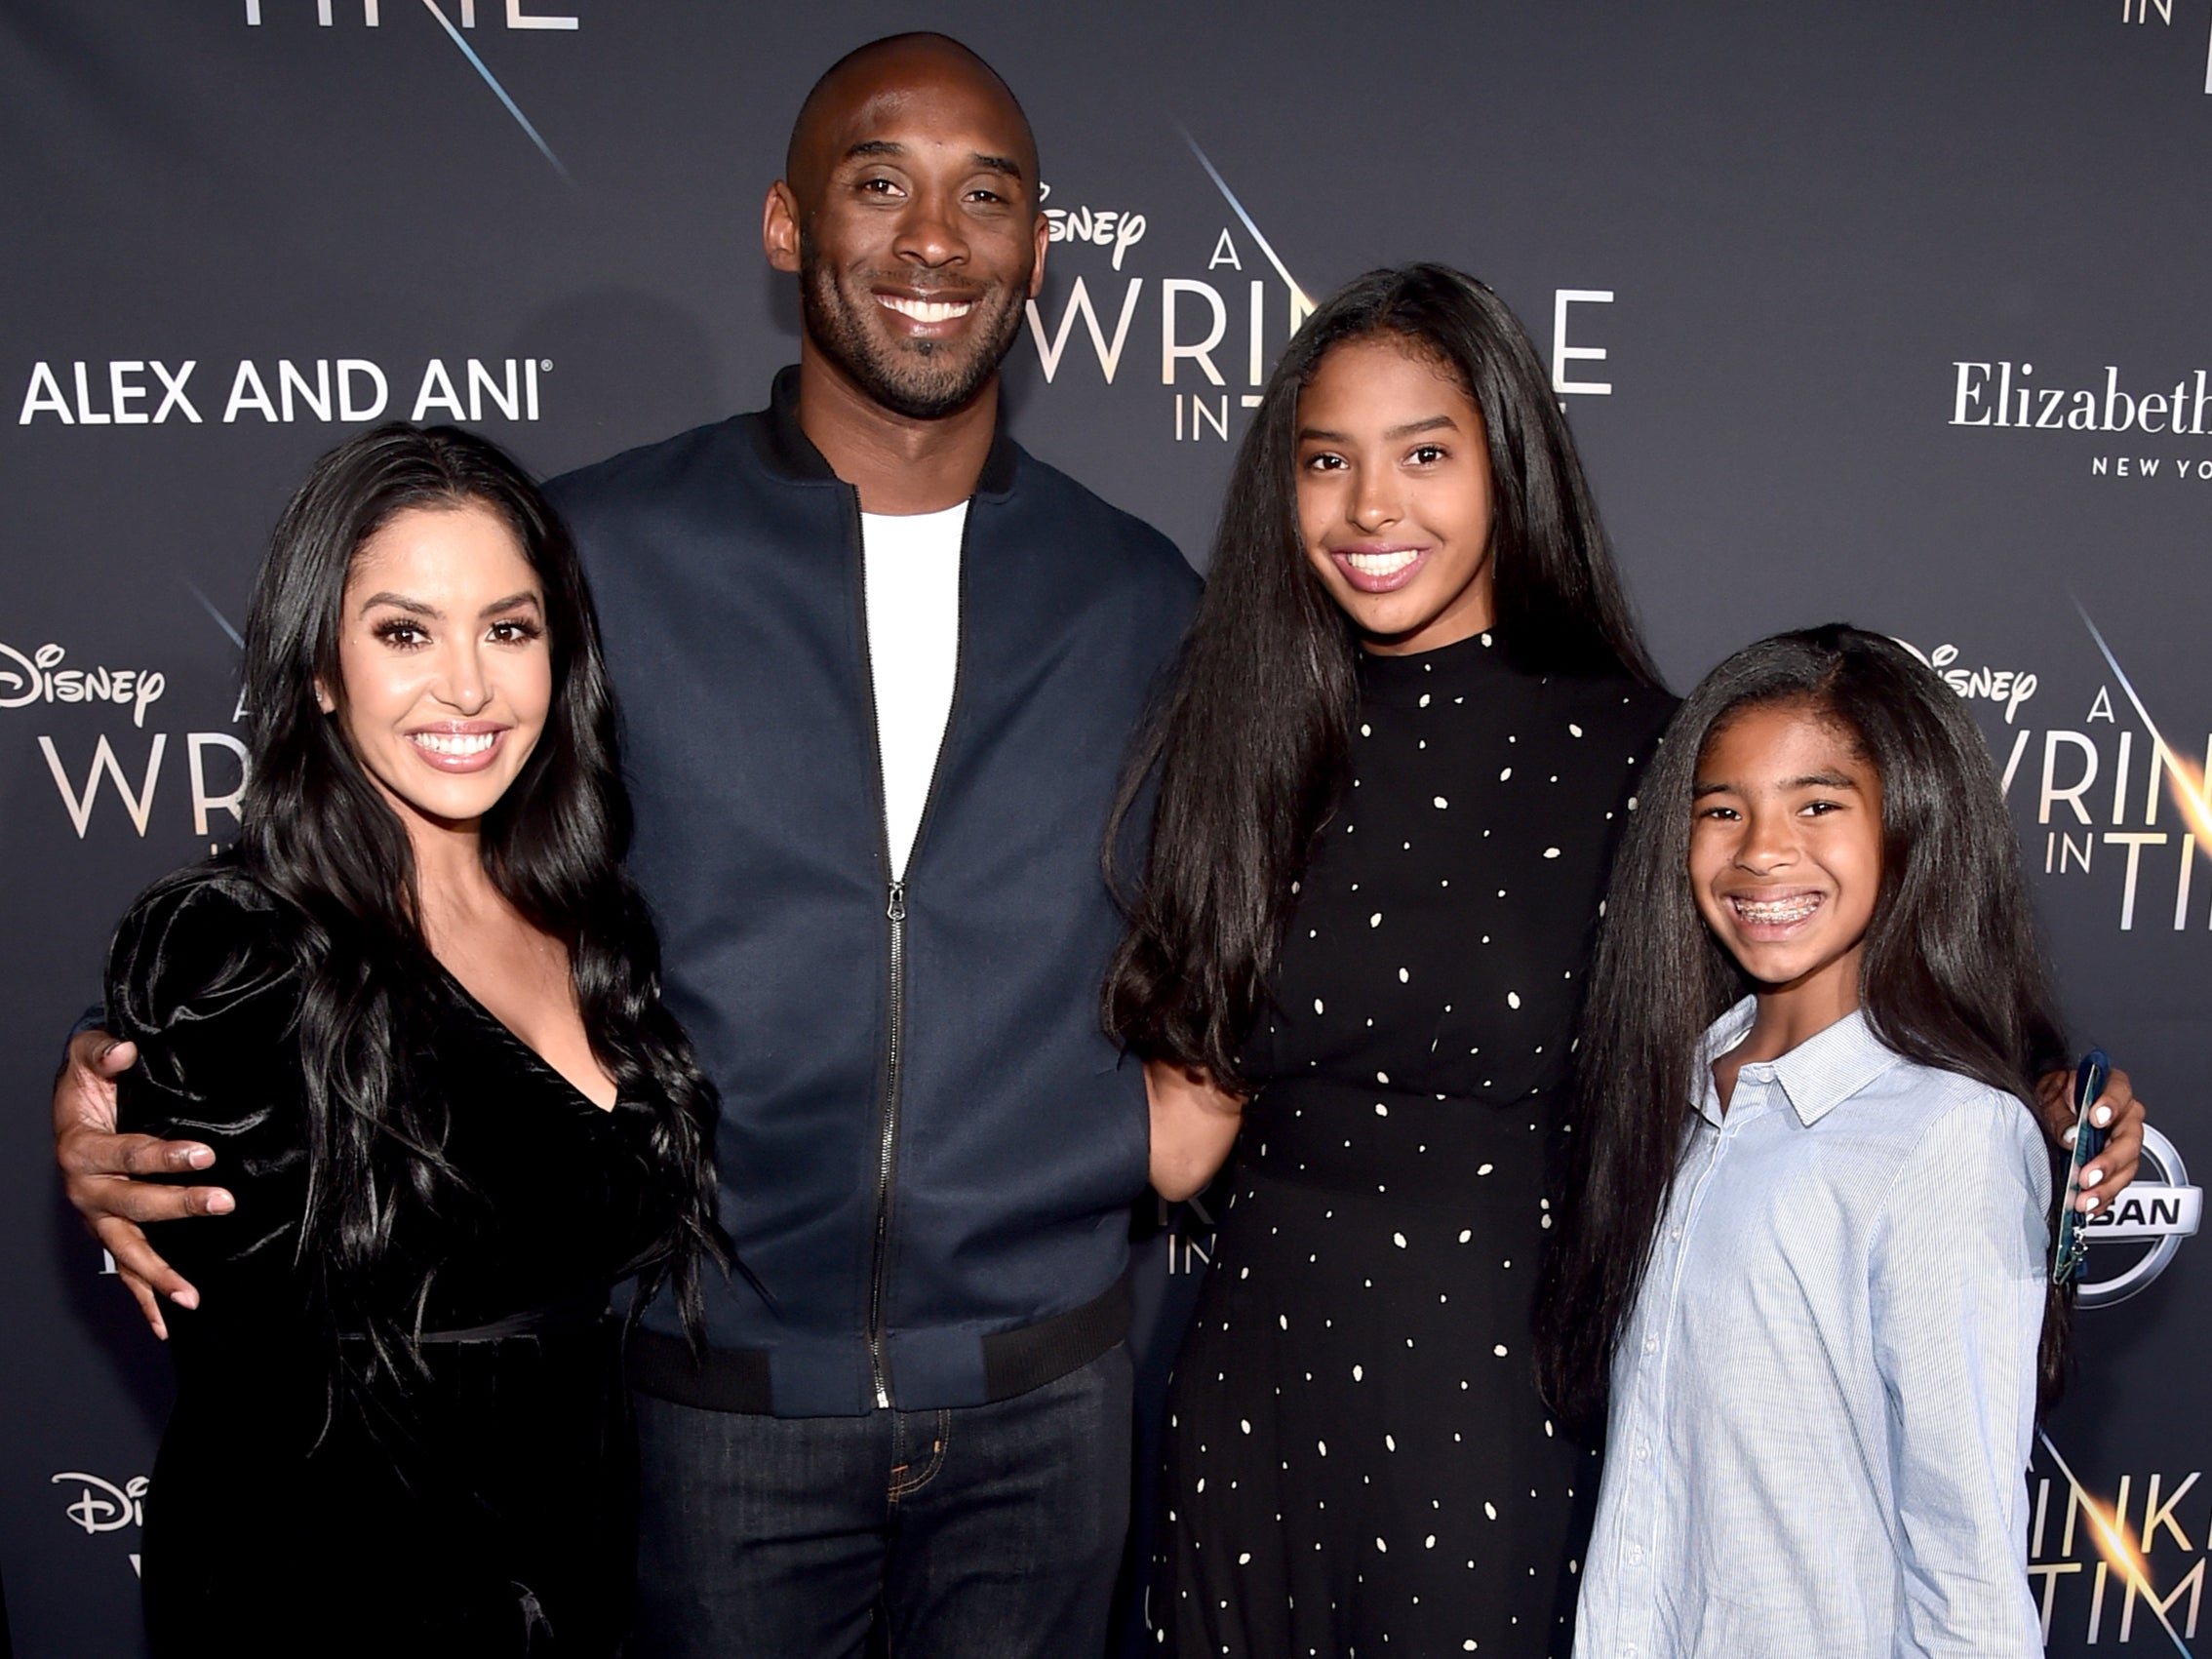 Vanessa Bryant shares tribute to Kobe and Gianna on one-year anniversary of their deaths